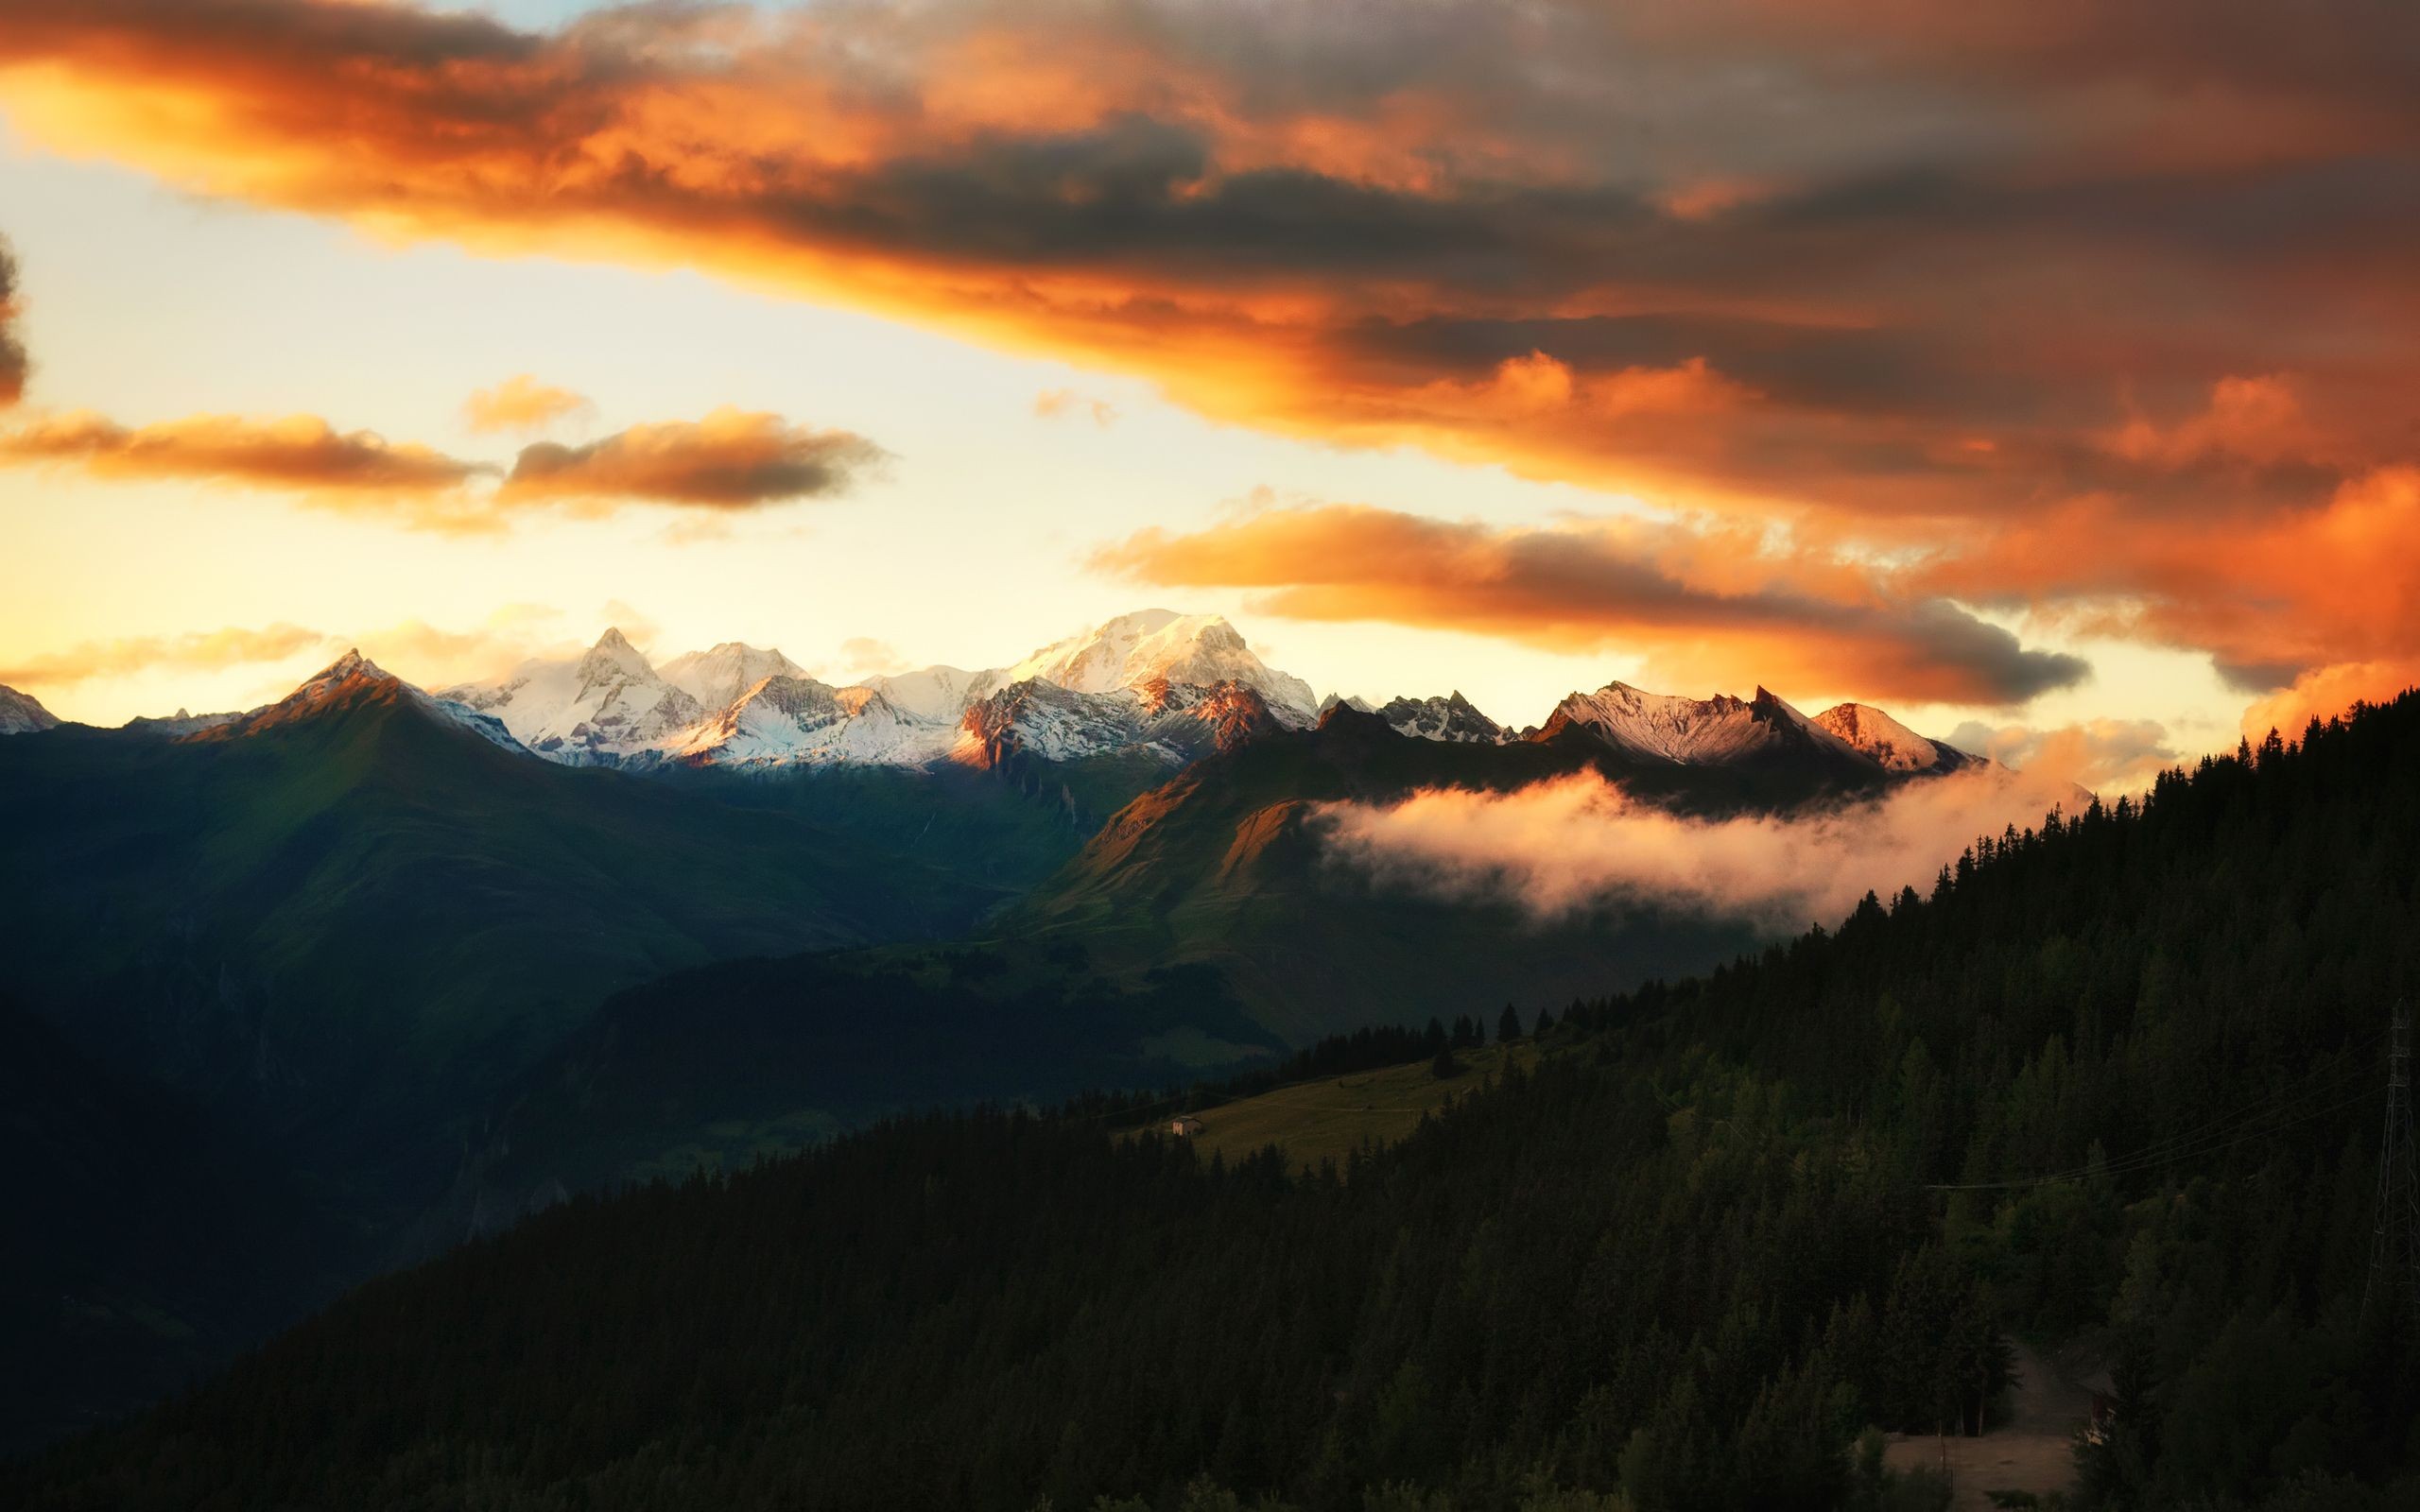 General 2560x1600 nature landscape mountains clouds trees forest sunset sky orange sky snowy peak low light